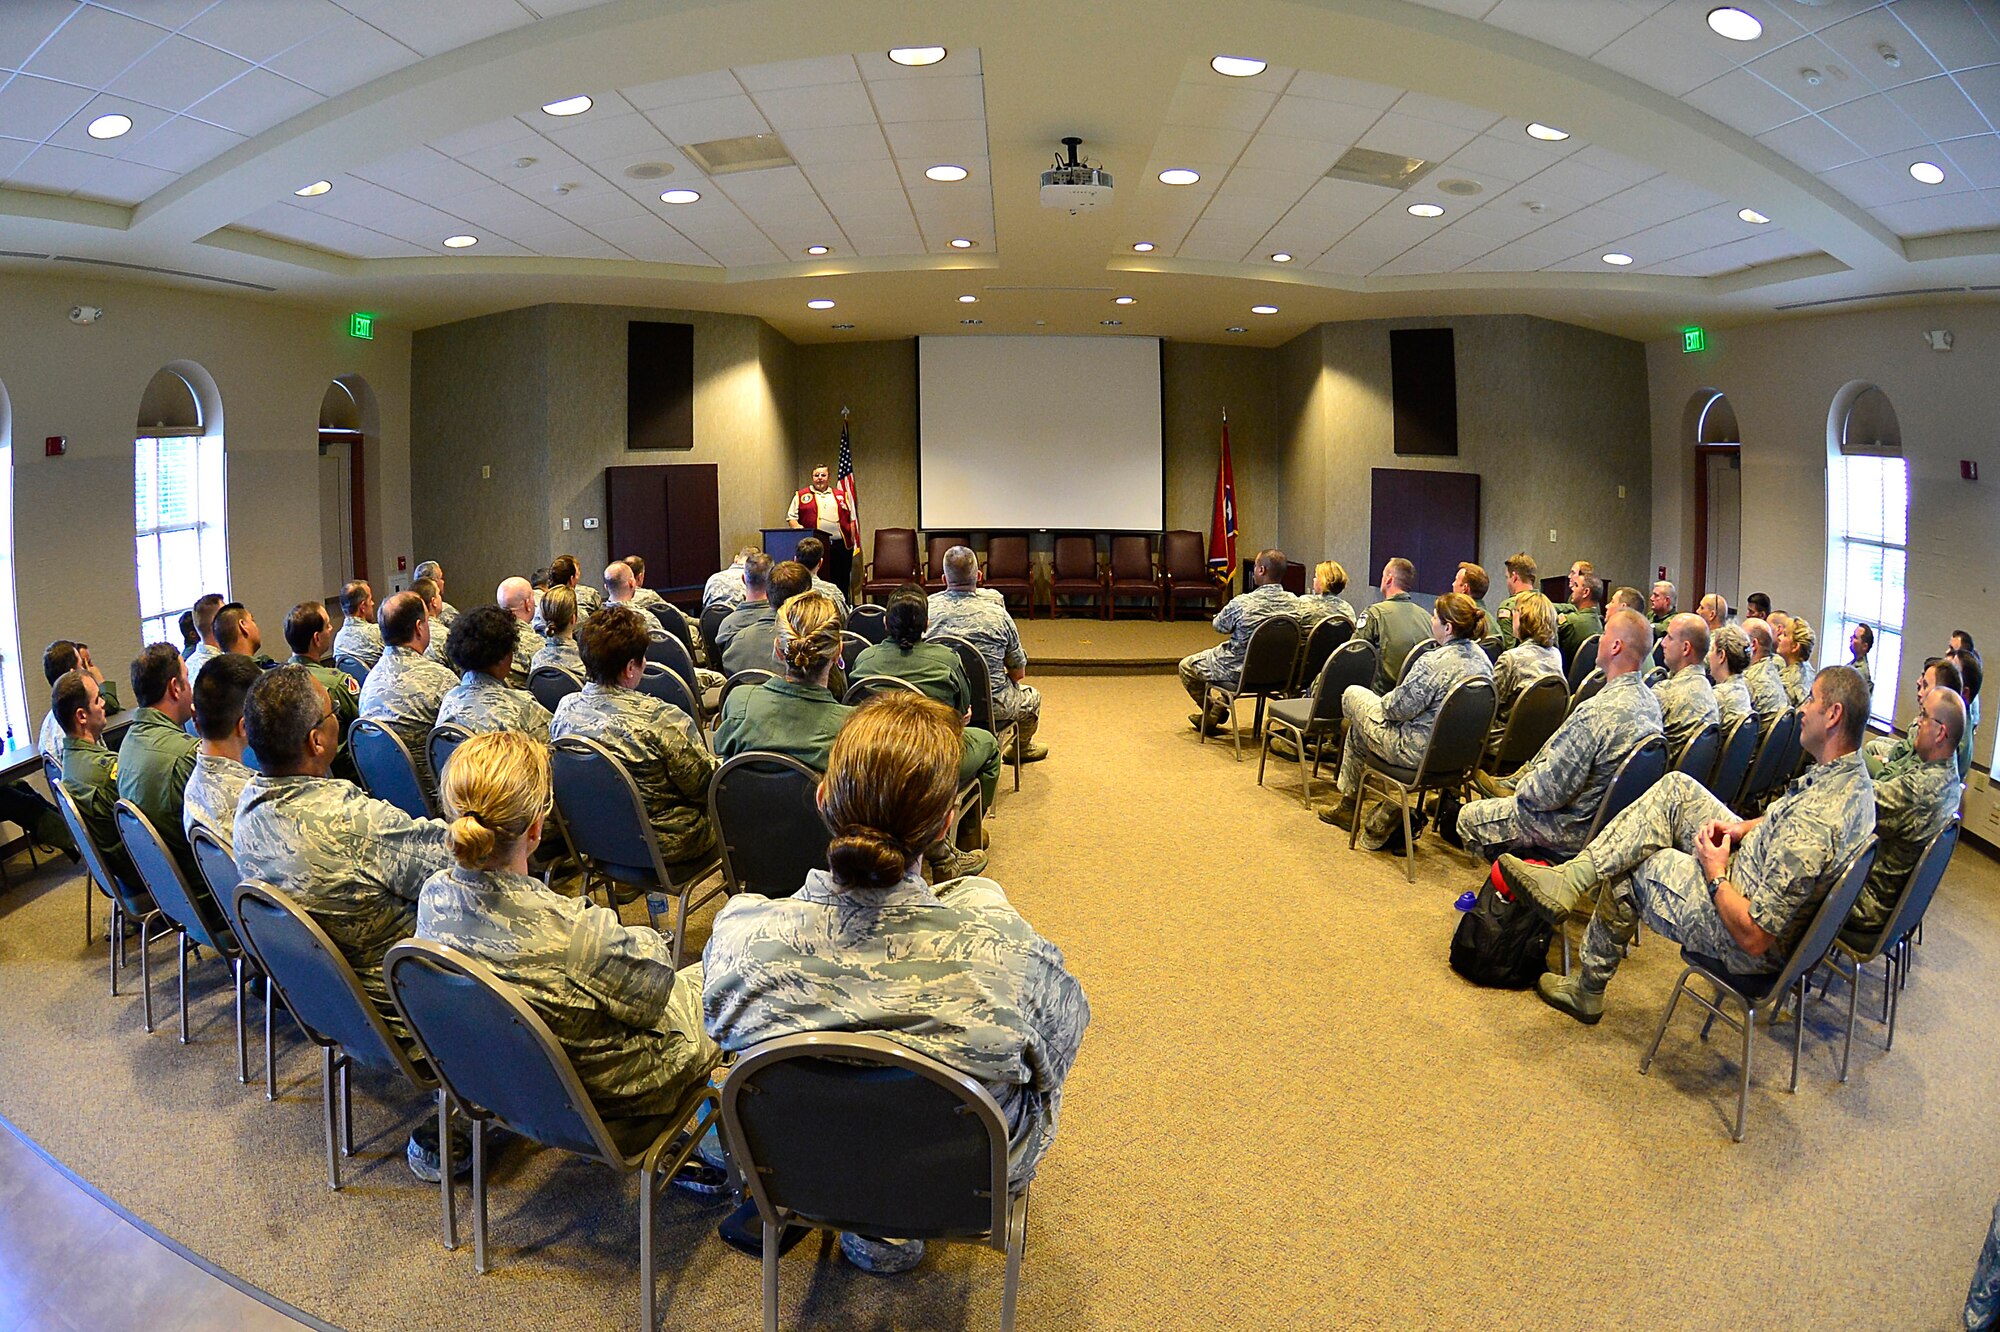 MCGHEE TYSON AIR NATIONAL GUARD BASE, Tenn. - More than 60 lieutenant colonels studying with the Air War College seminar at the I.G. Brown Training and Education Center here, June 4, 2015, listen to retired Air Force Capt. William Robinson, the first enlisted POW of the Vietnam War, who shared his experiences. The officers were part of the AWC's fourth seminar on campus for the Air National Guard and Air Force Reserve Command, which included one Marine Corps officer in attendance. (U.S. Air National Guard photo by Master Sgt. Mike R. Smith/Released) 